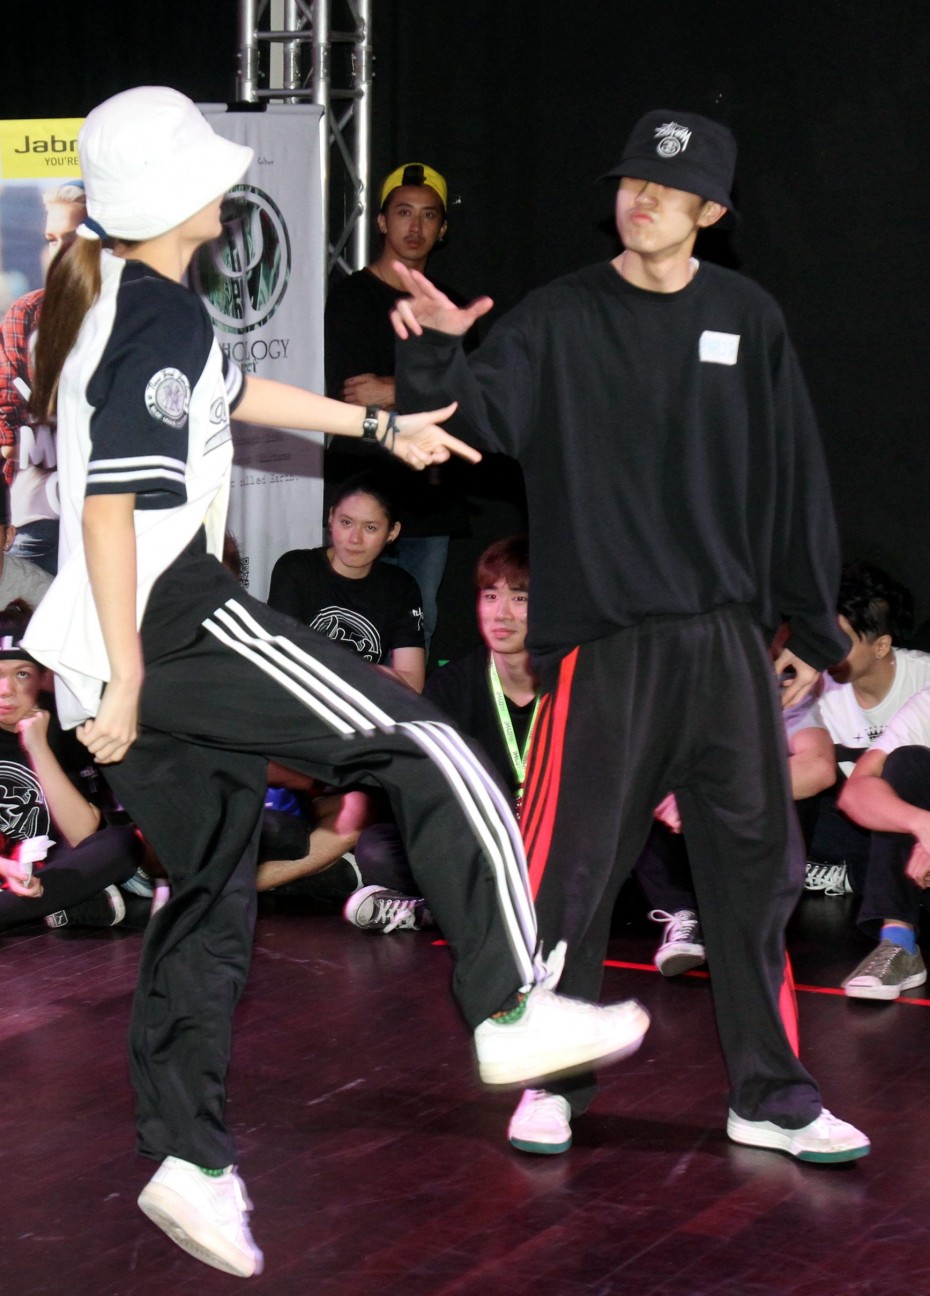 B-boy Kho Kar Hua (right) came up against his girlfriend Yap Foong Yin (left) in the finals of the Hop-hop 1 on 1 category during the Malaysian preliminaries. 